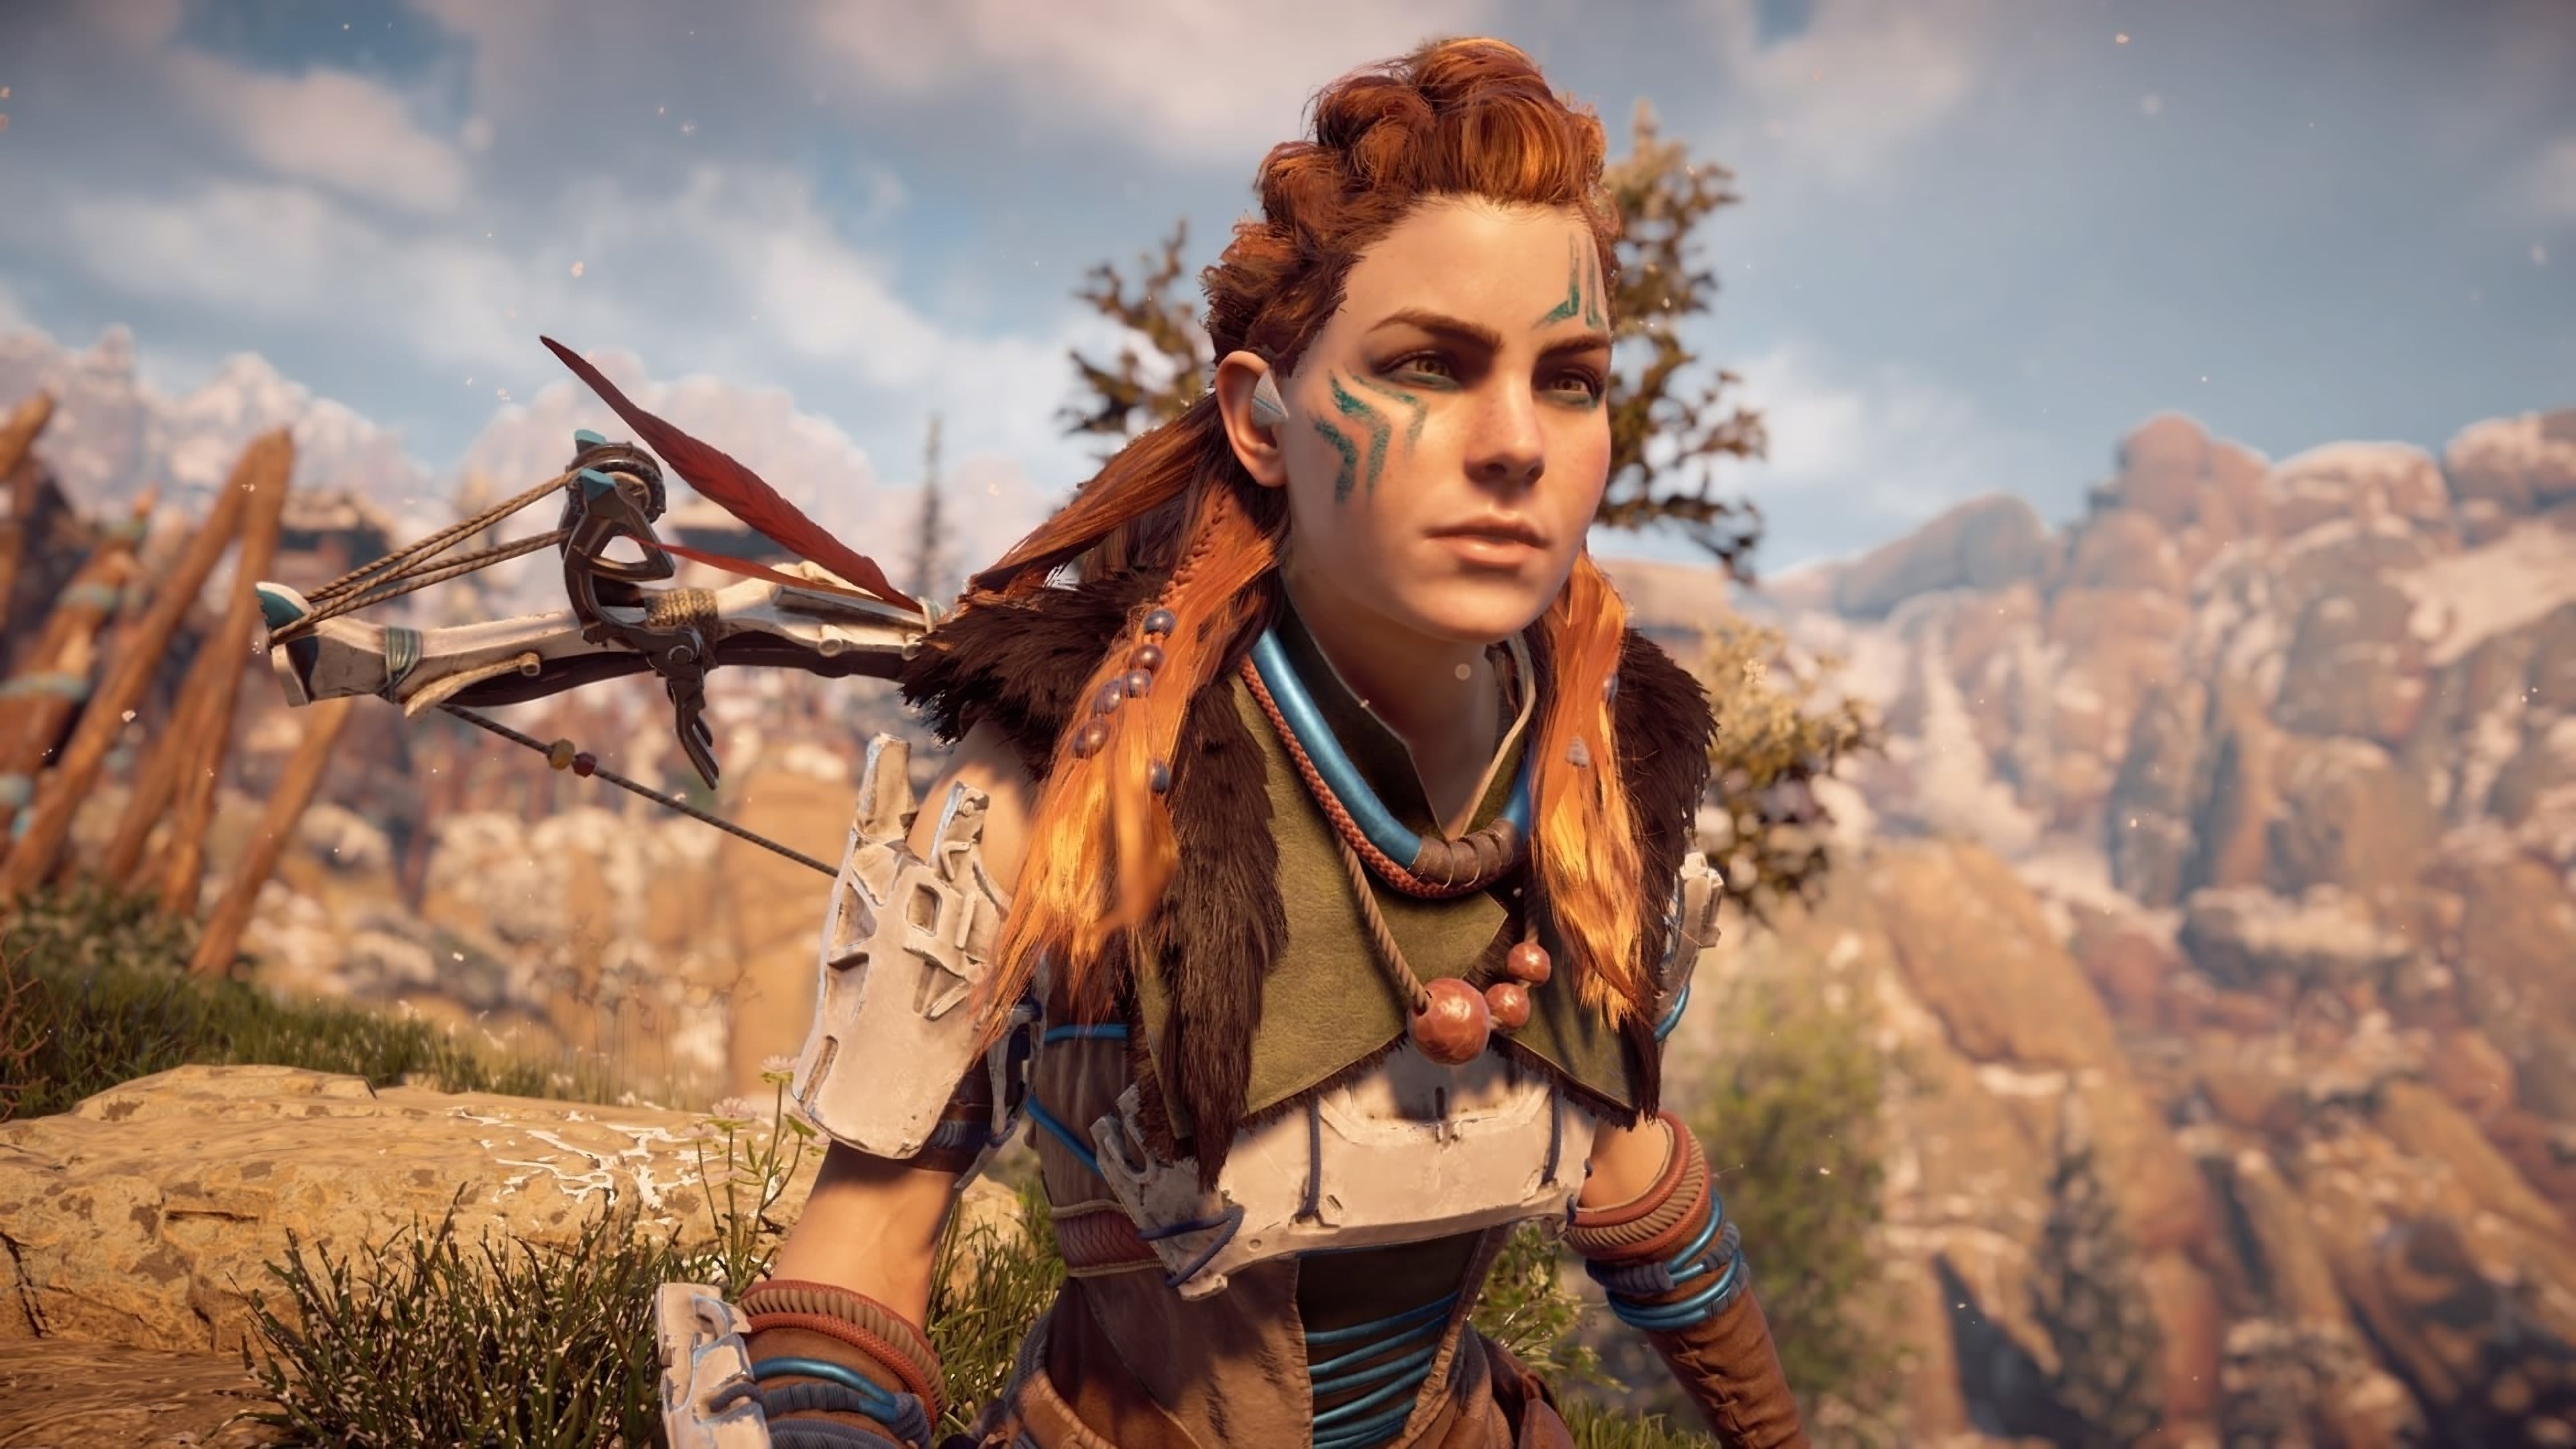 Image for Horizon Zero Dawn PC: An Amazing Game Gets A Disappointing Port